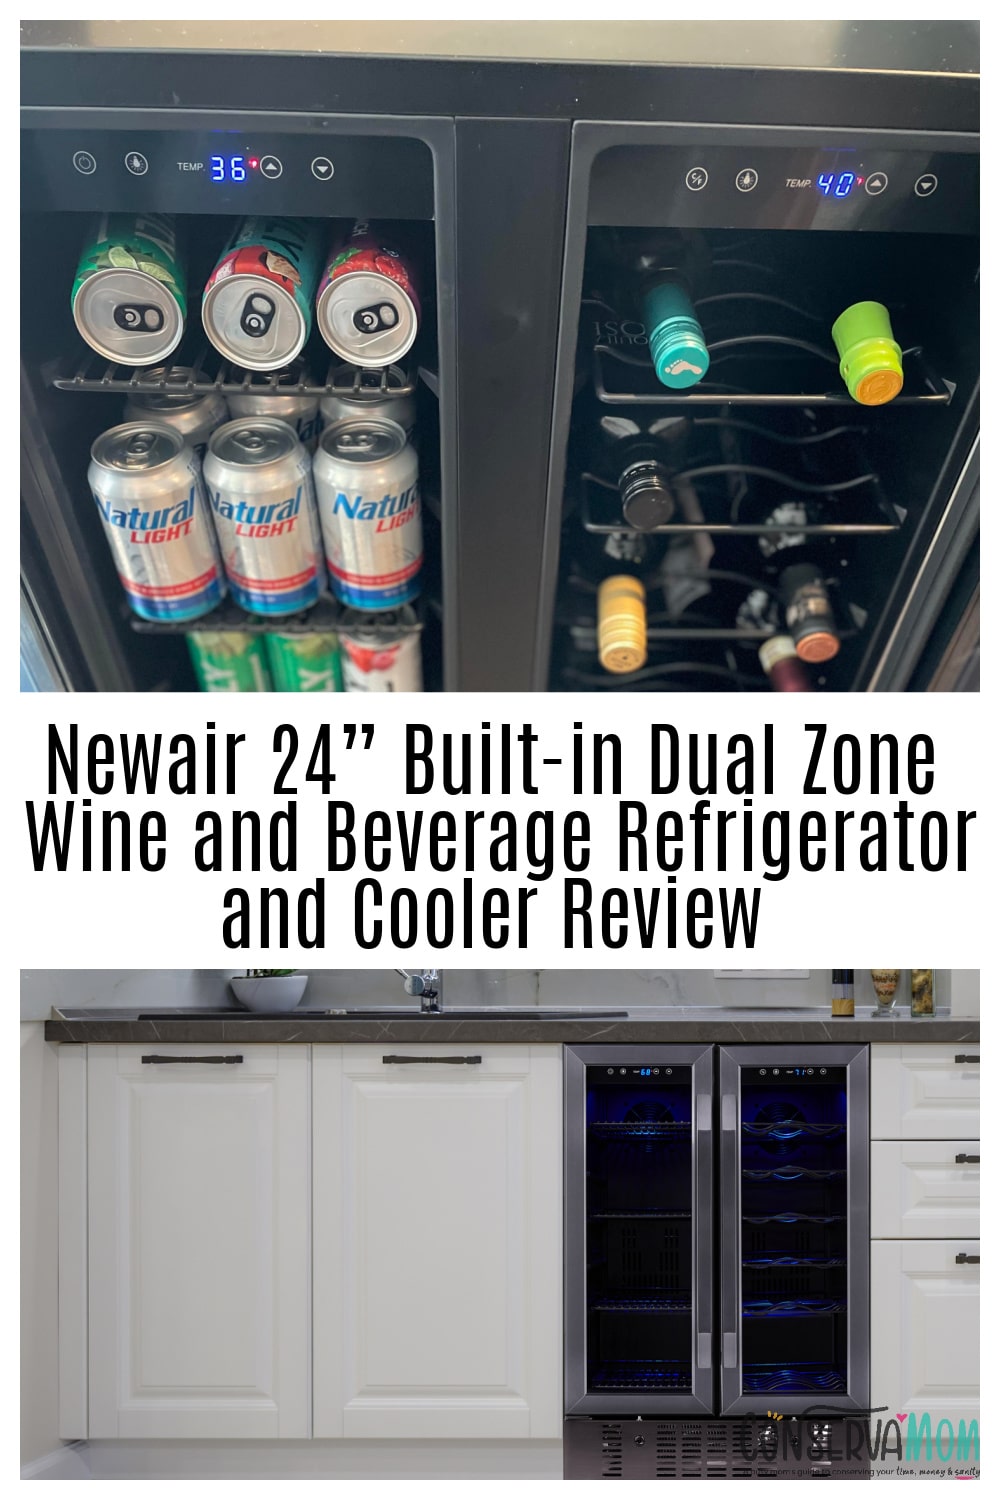 Newair 24” Built-in Dual Zone Wine and Beverage Refrigerator and Cooler  Review